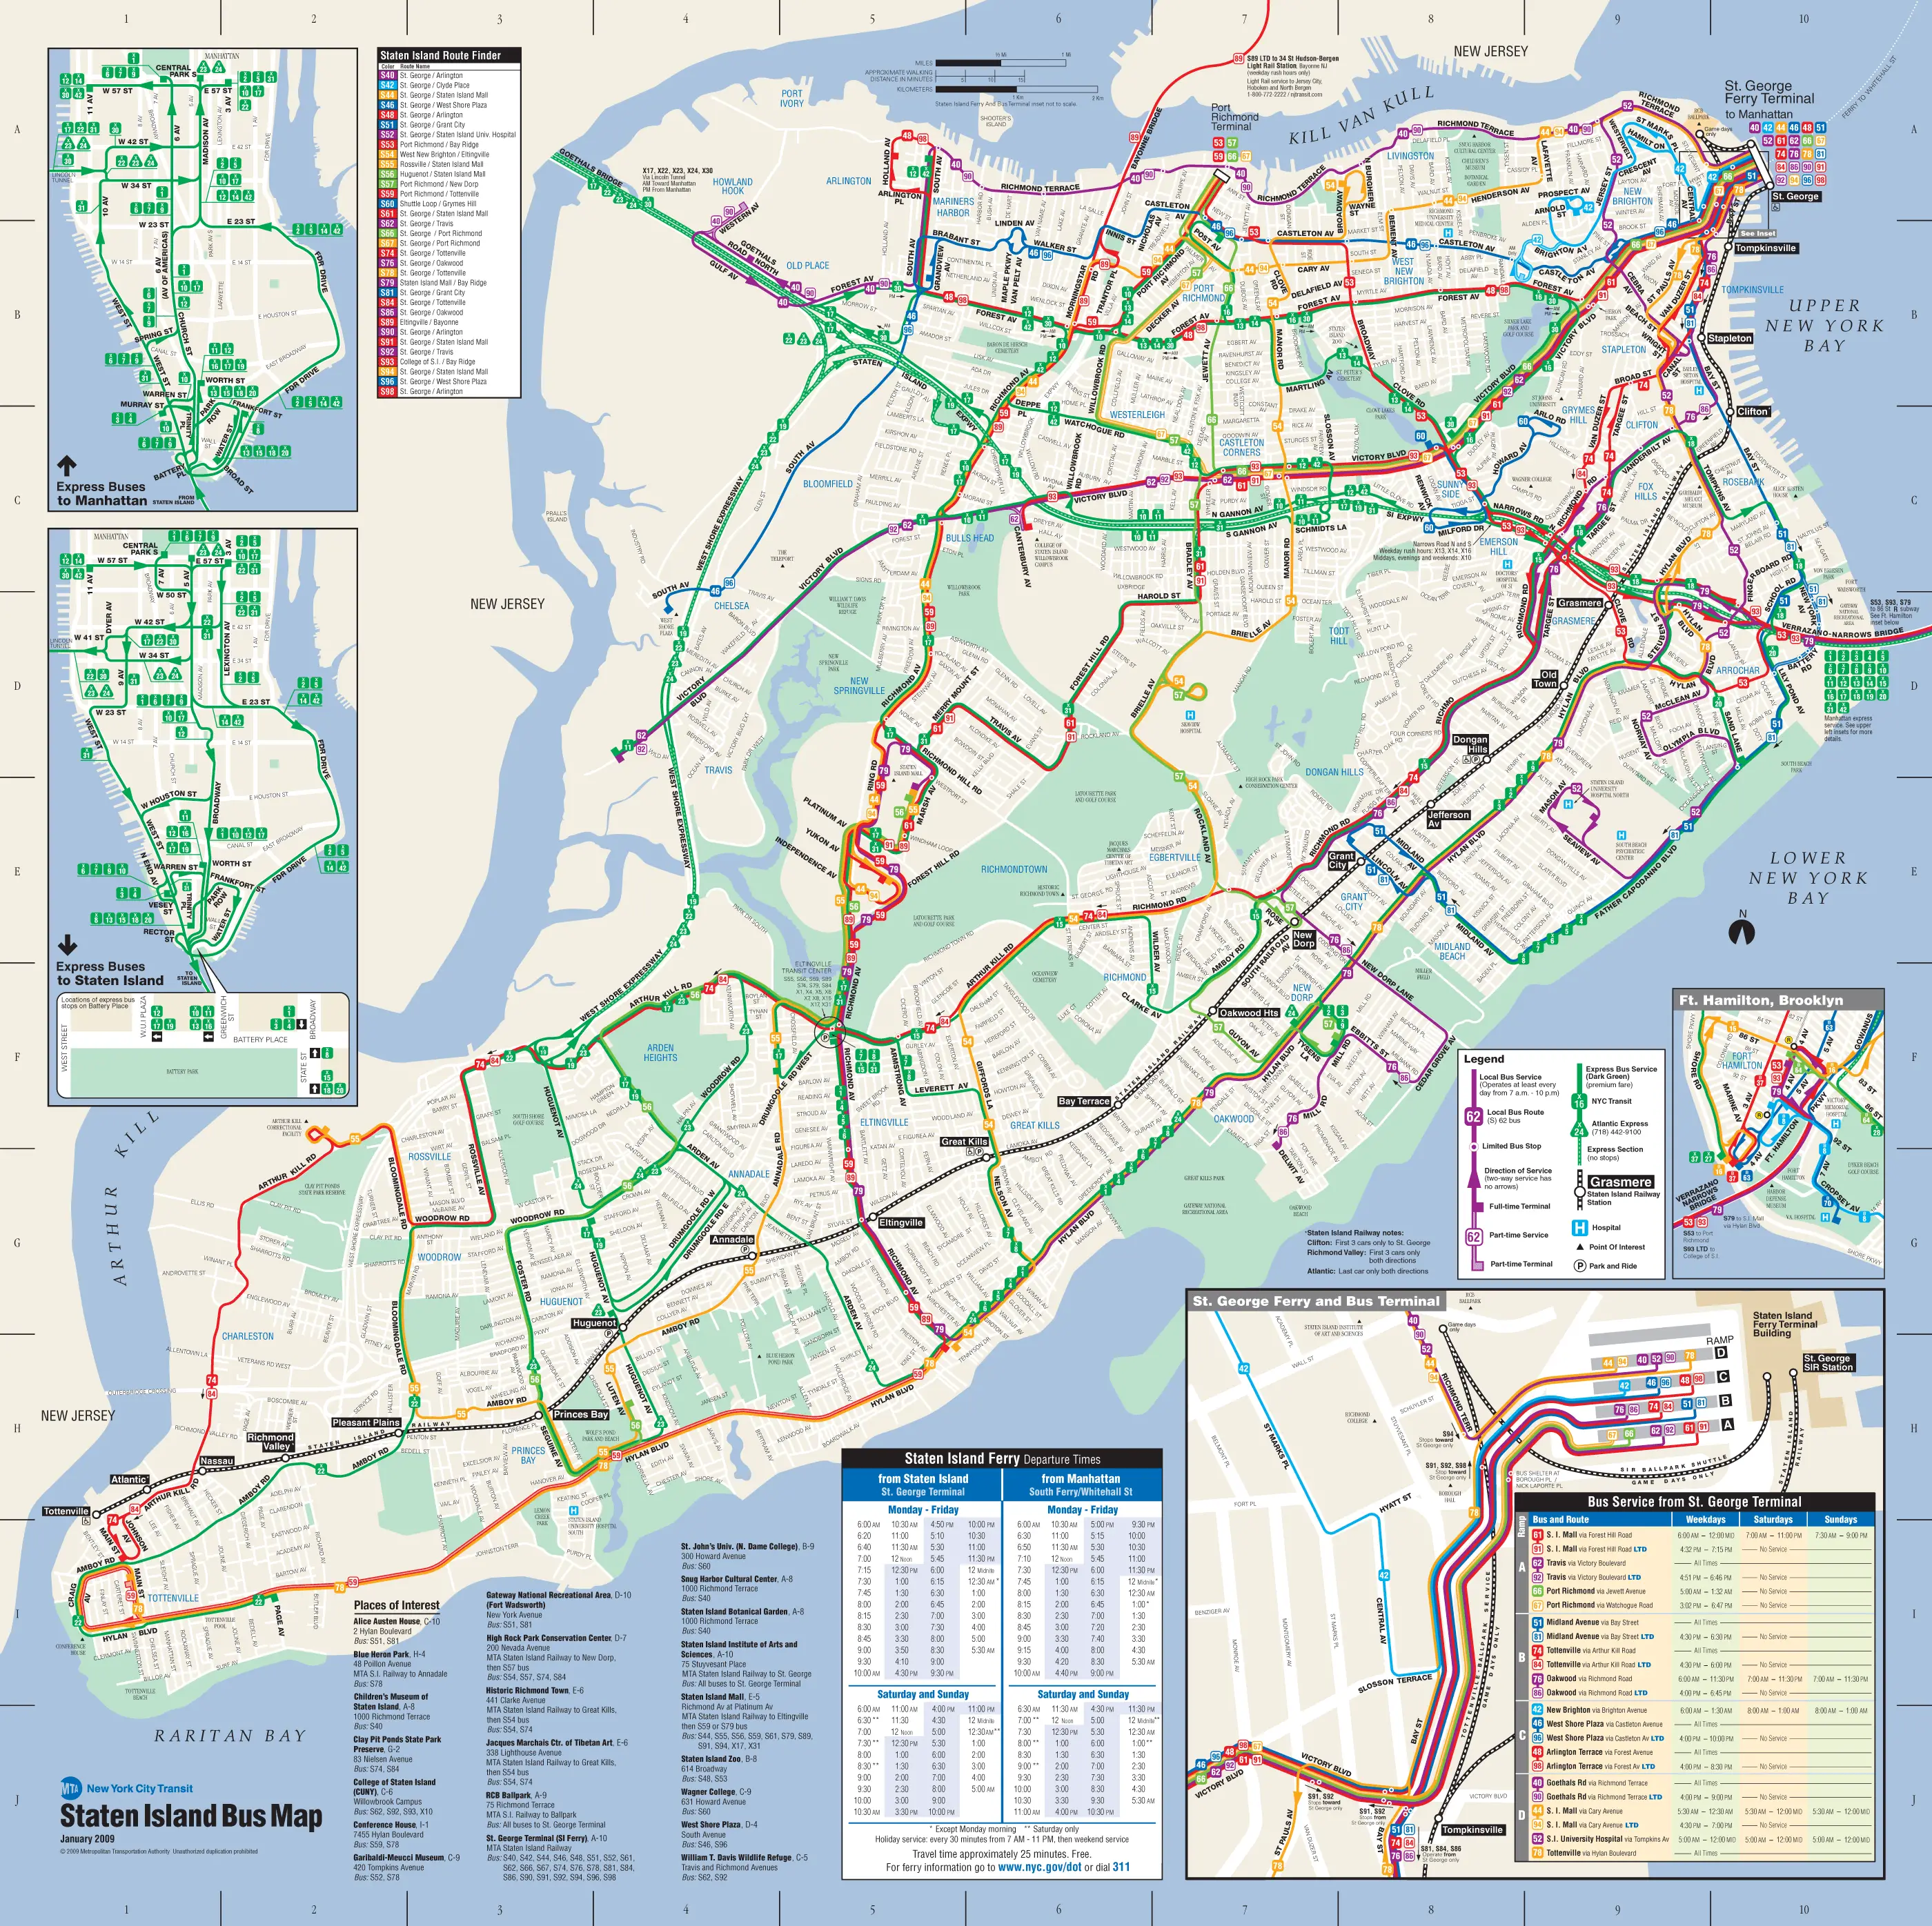 Staten Island Rapid Transit Map Cities And Towns Map - vrogue.co